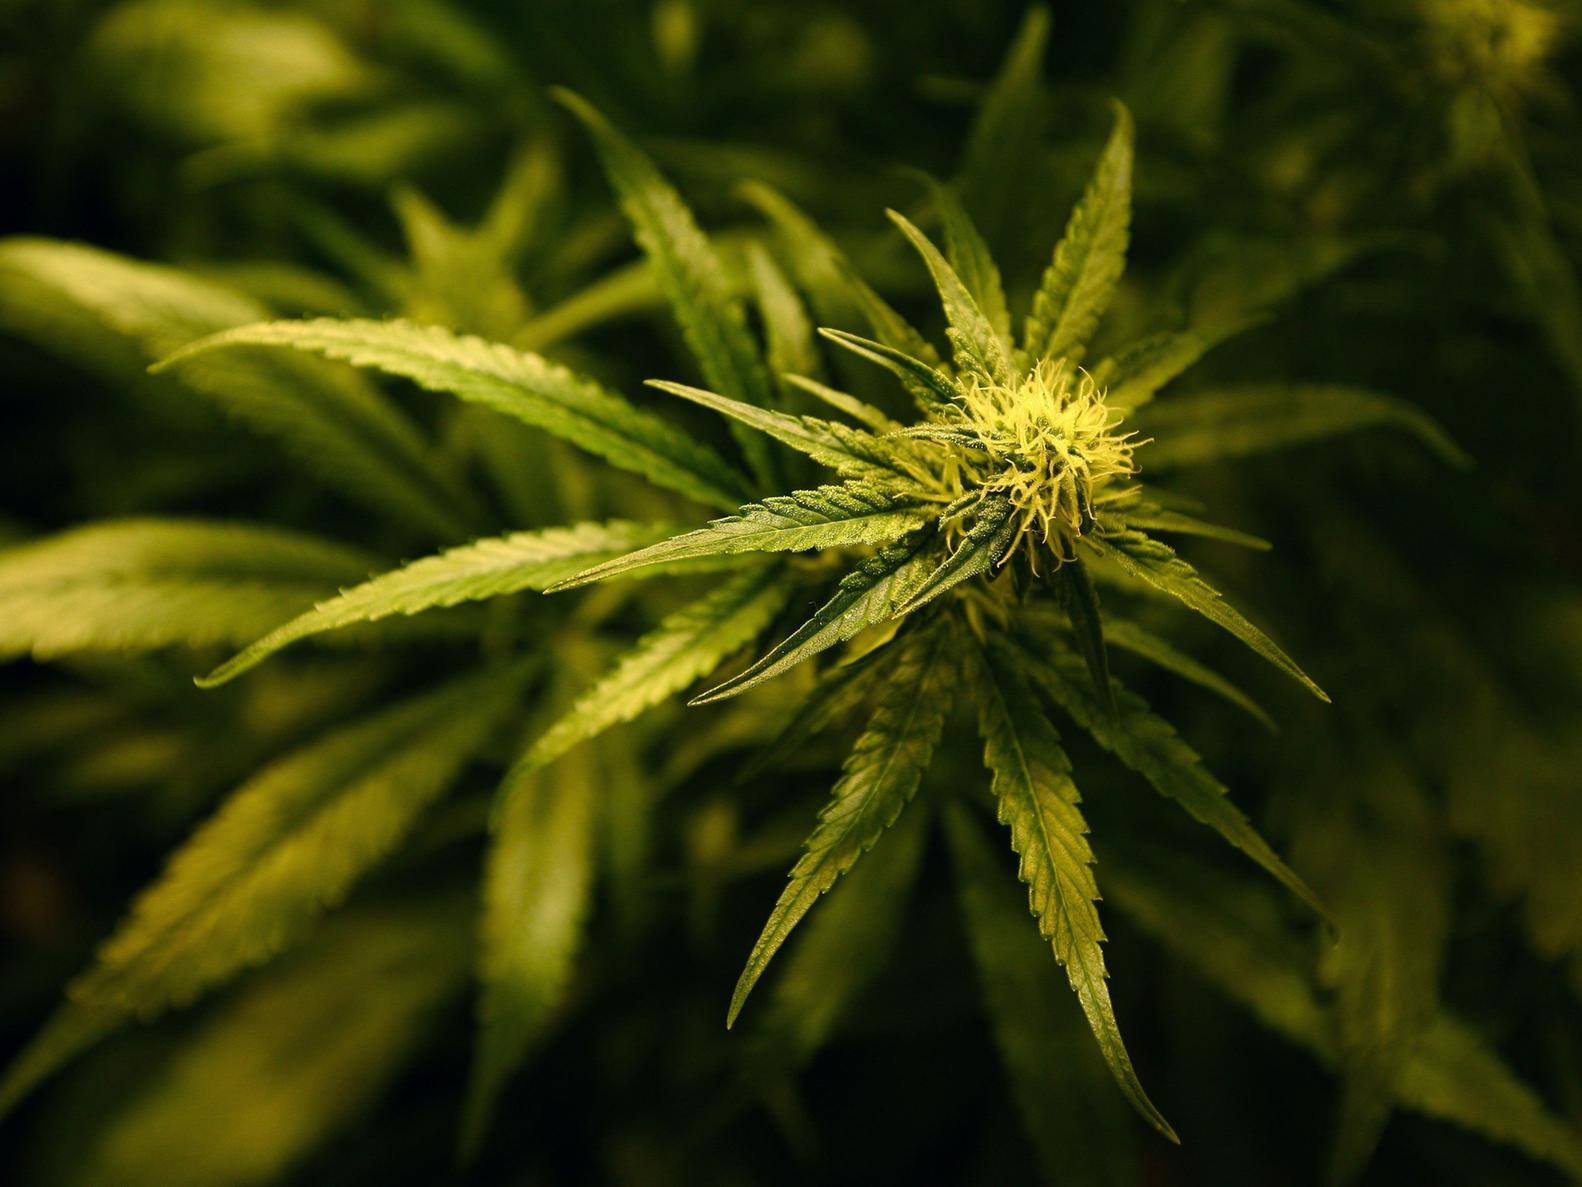 Police made 4,373 seizures of cannabis, including 56kg of herbal cannabis, 3kg of cannabis resin and 21,436 cannabis plants. Picture: Gareth Fuller/PA Wire